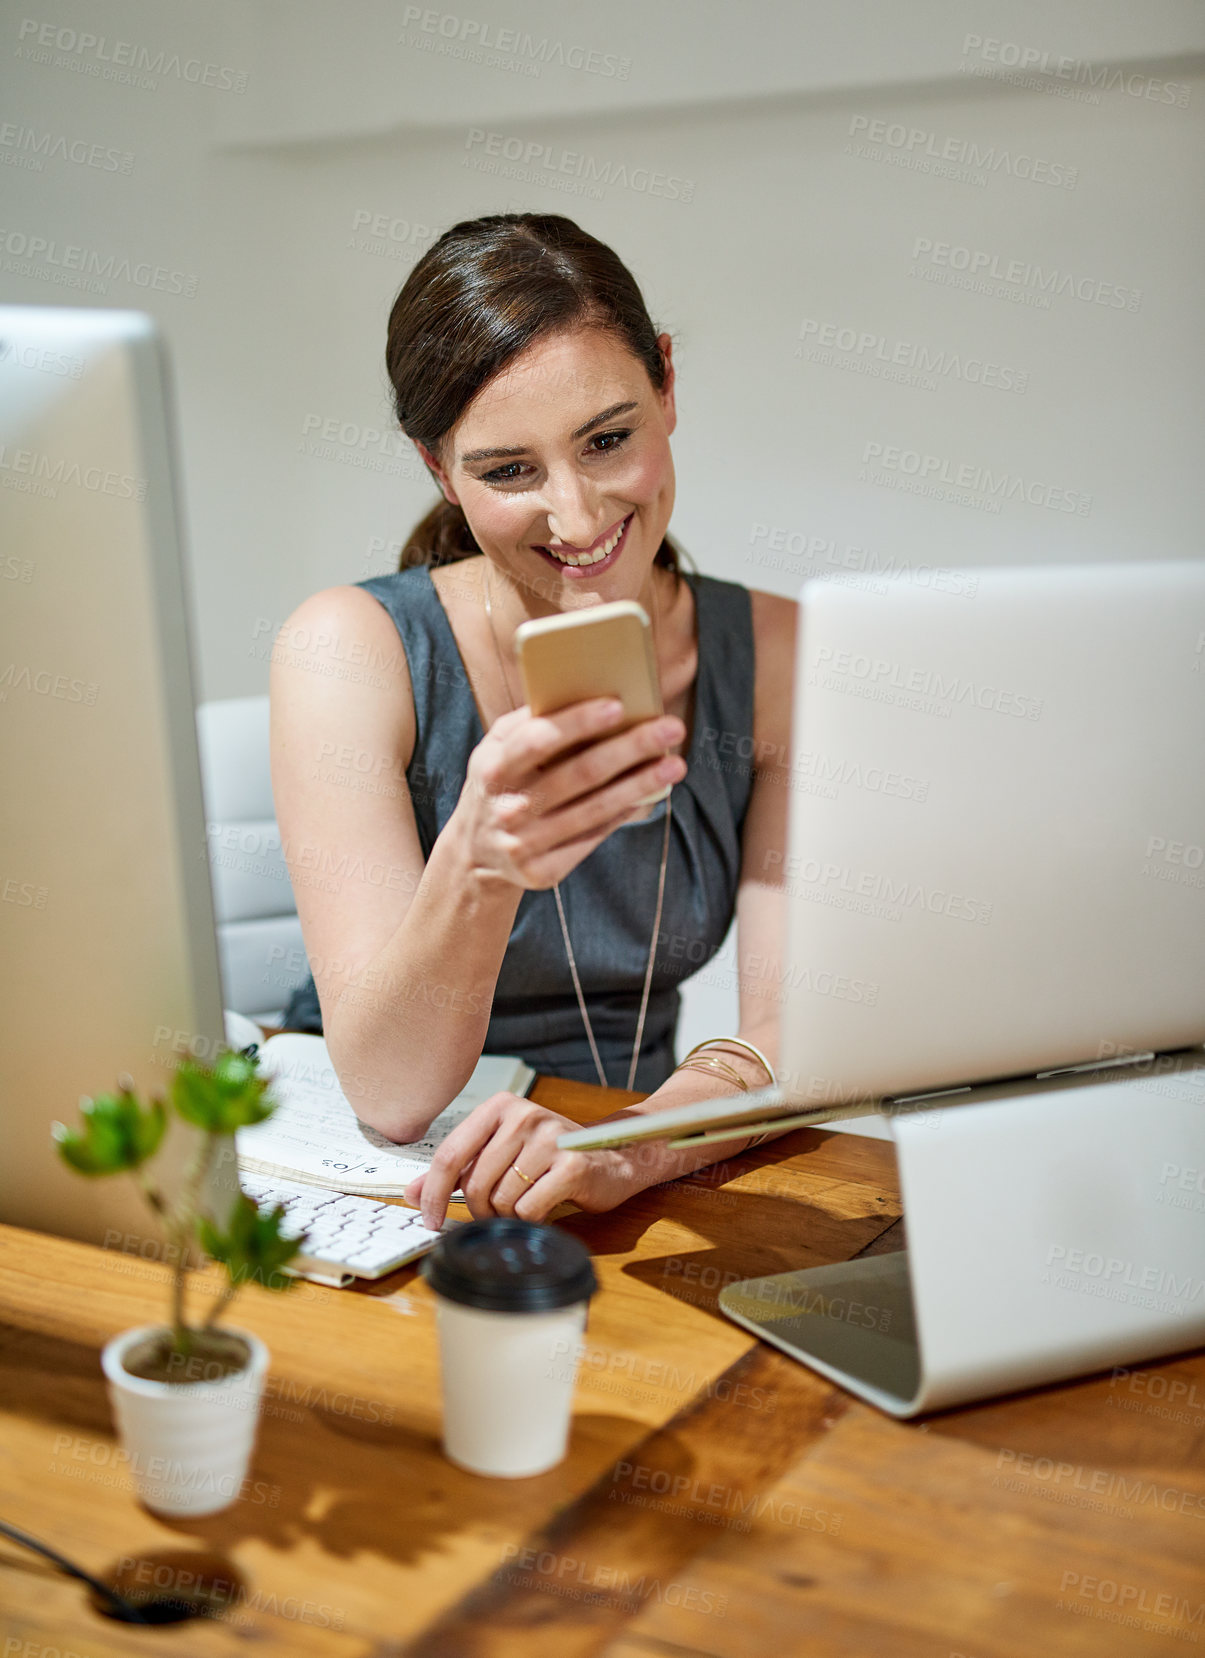 Buy stock photo Shot of a professional businesswoman using a phone at her office desk